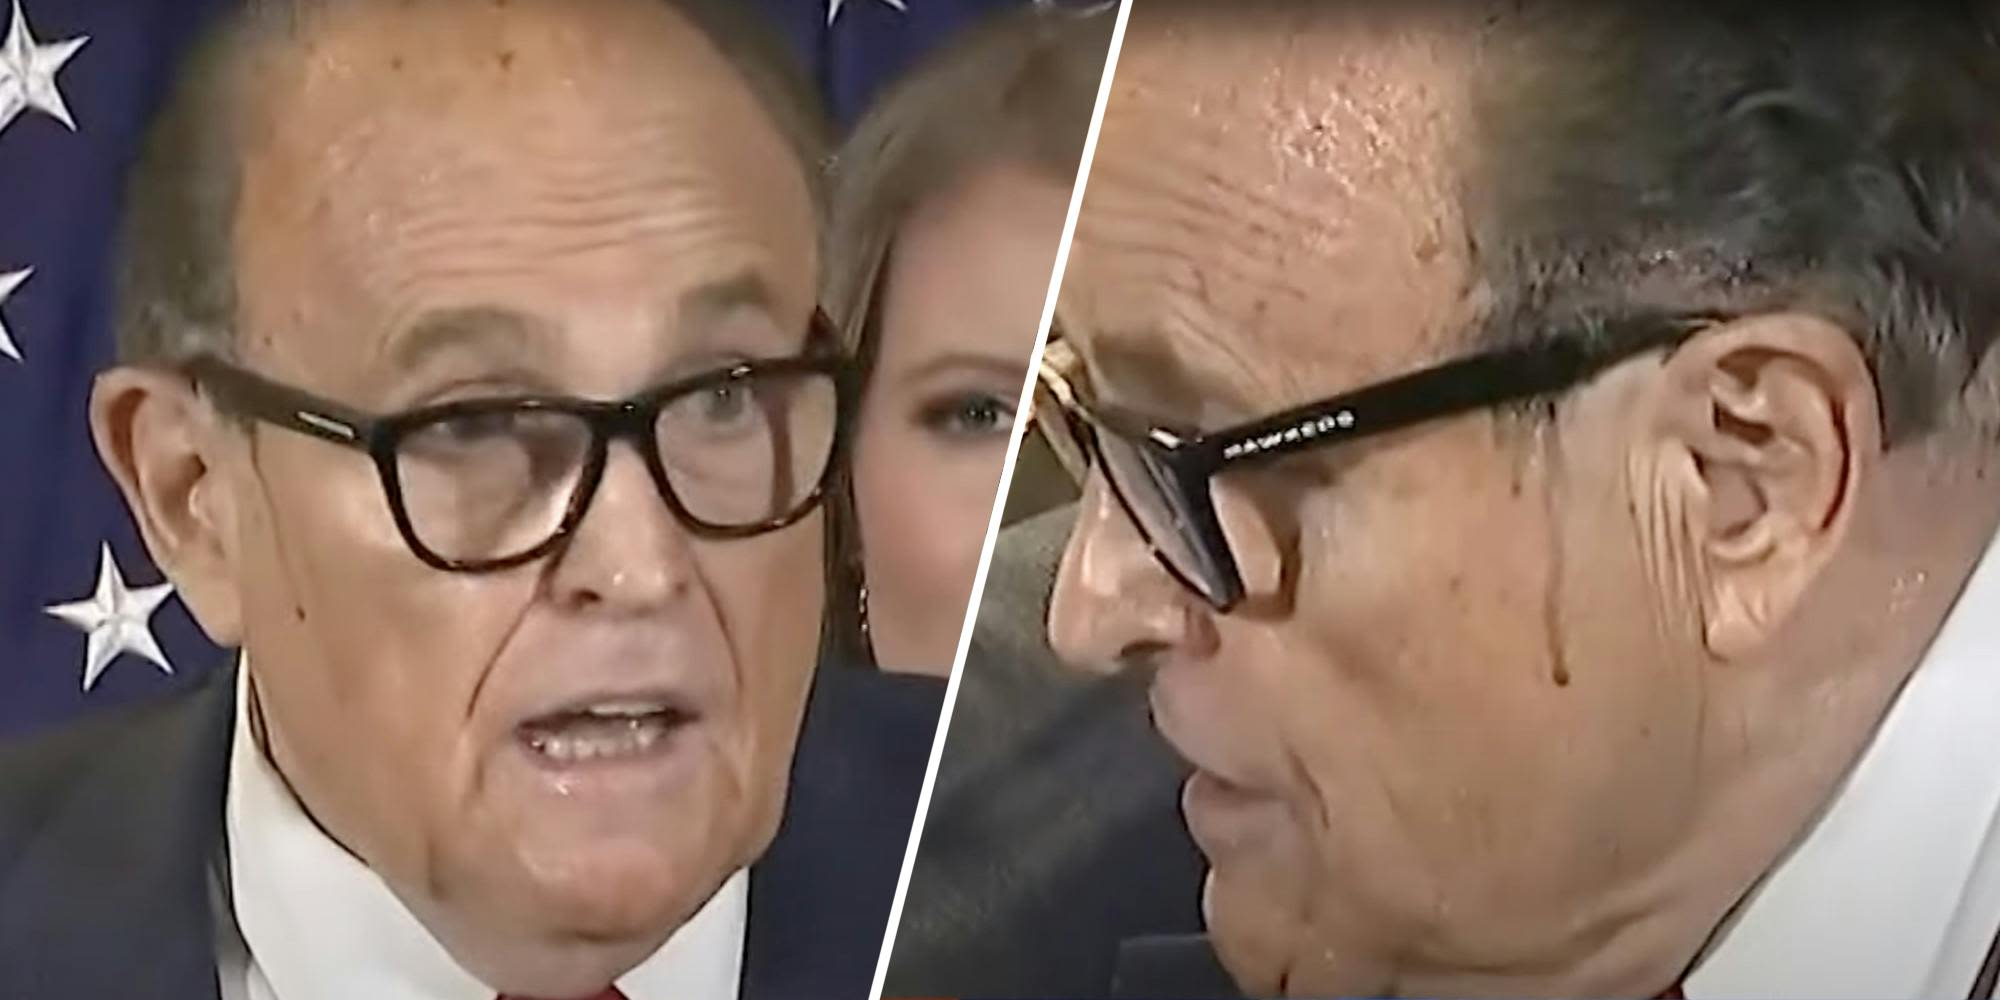 Rudy Giuliani bought a 'teaching documentary' on how to obtain 'freedom' from adult content, bankruptcy records show